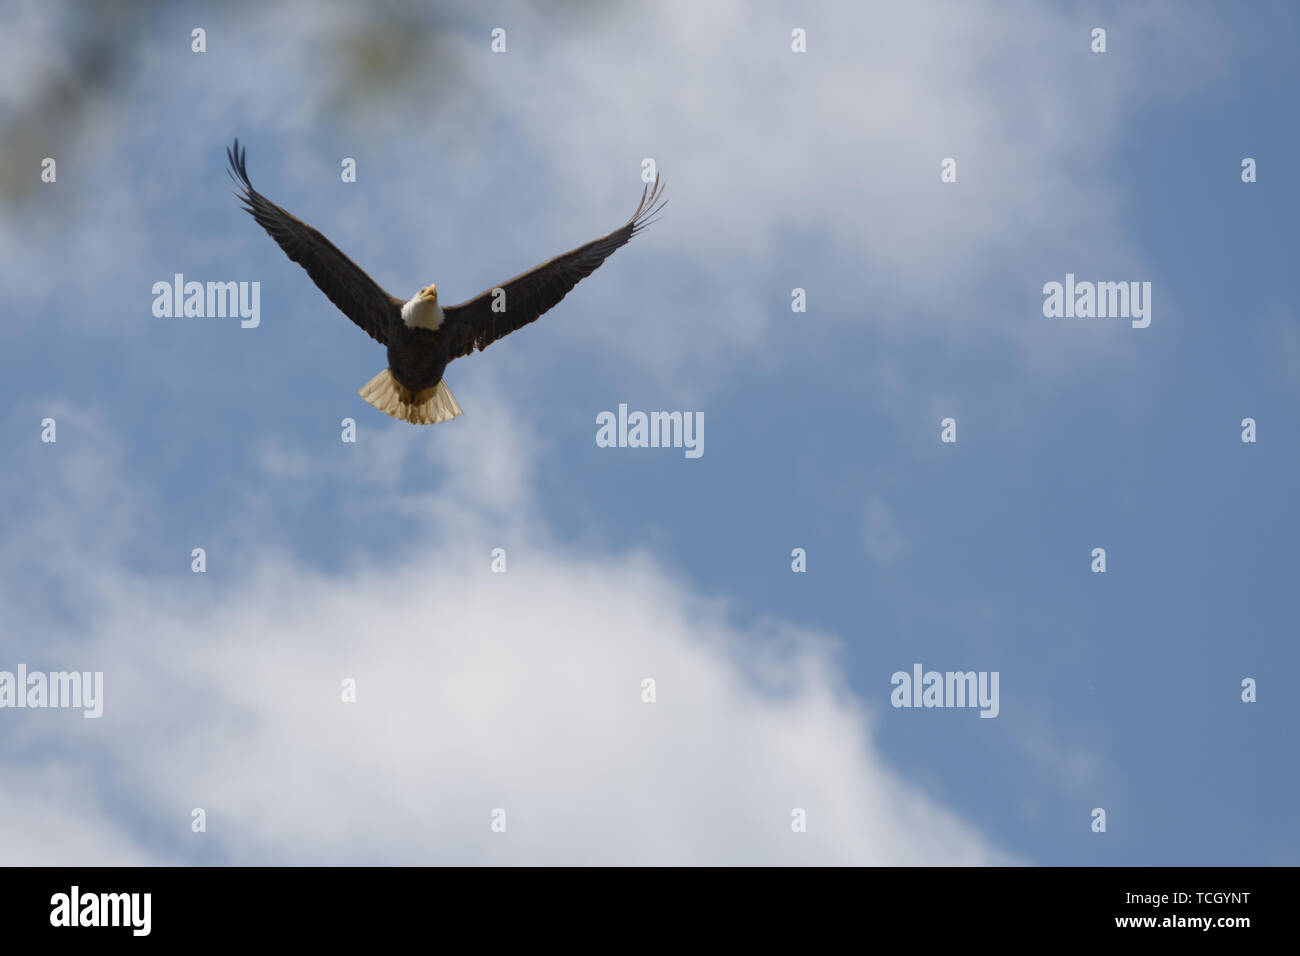 From below shot of majestic eagle with huge wings flying in blue sky with clouds Stock Photo